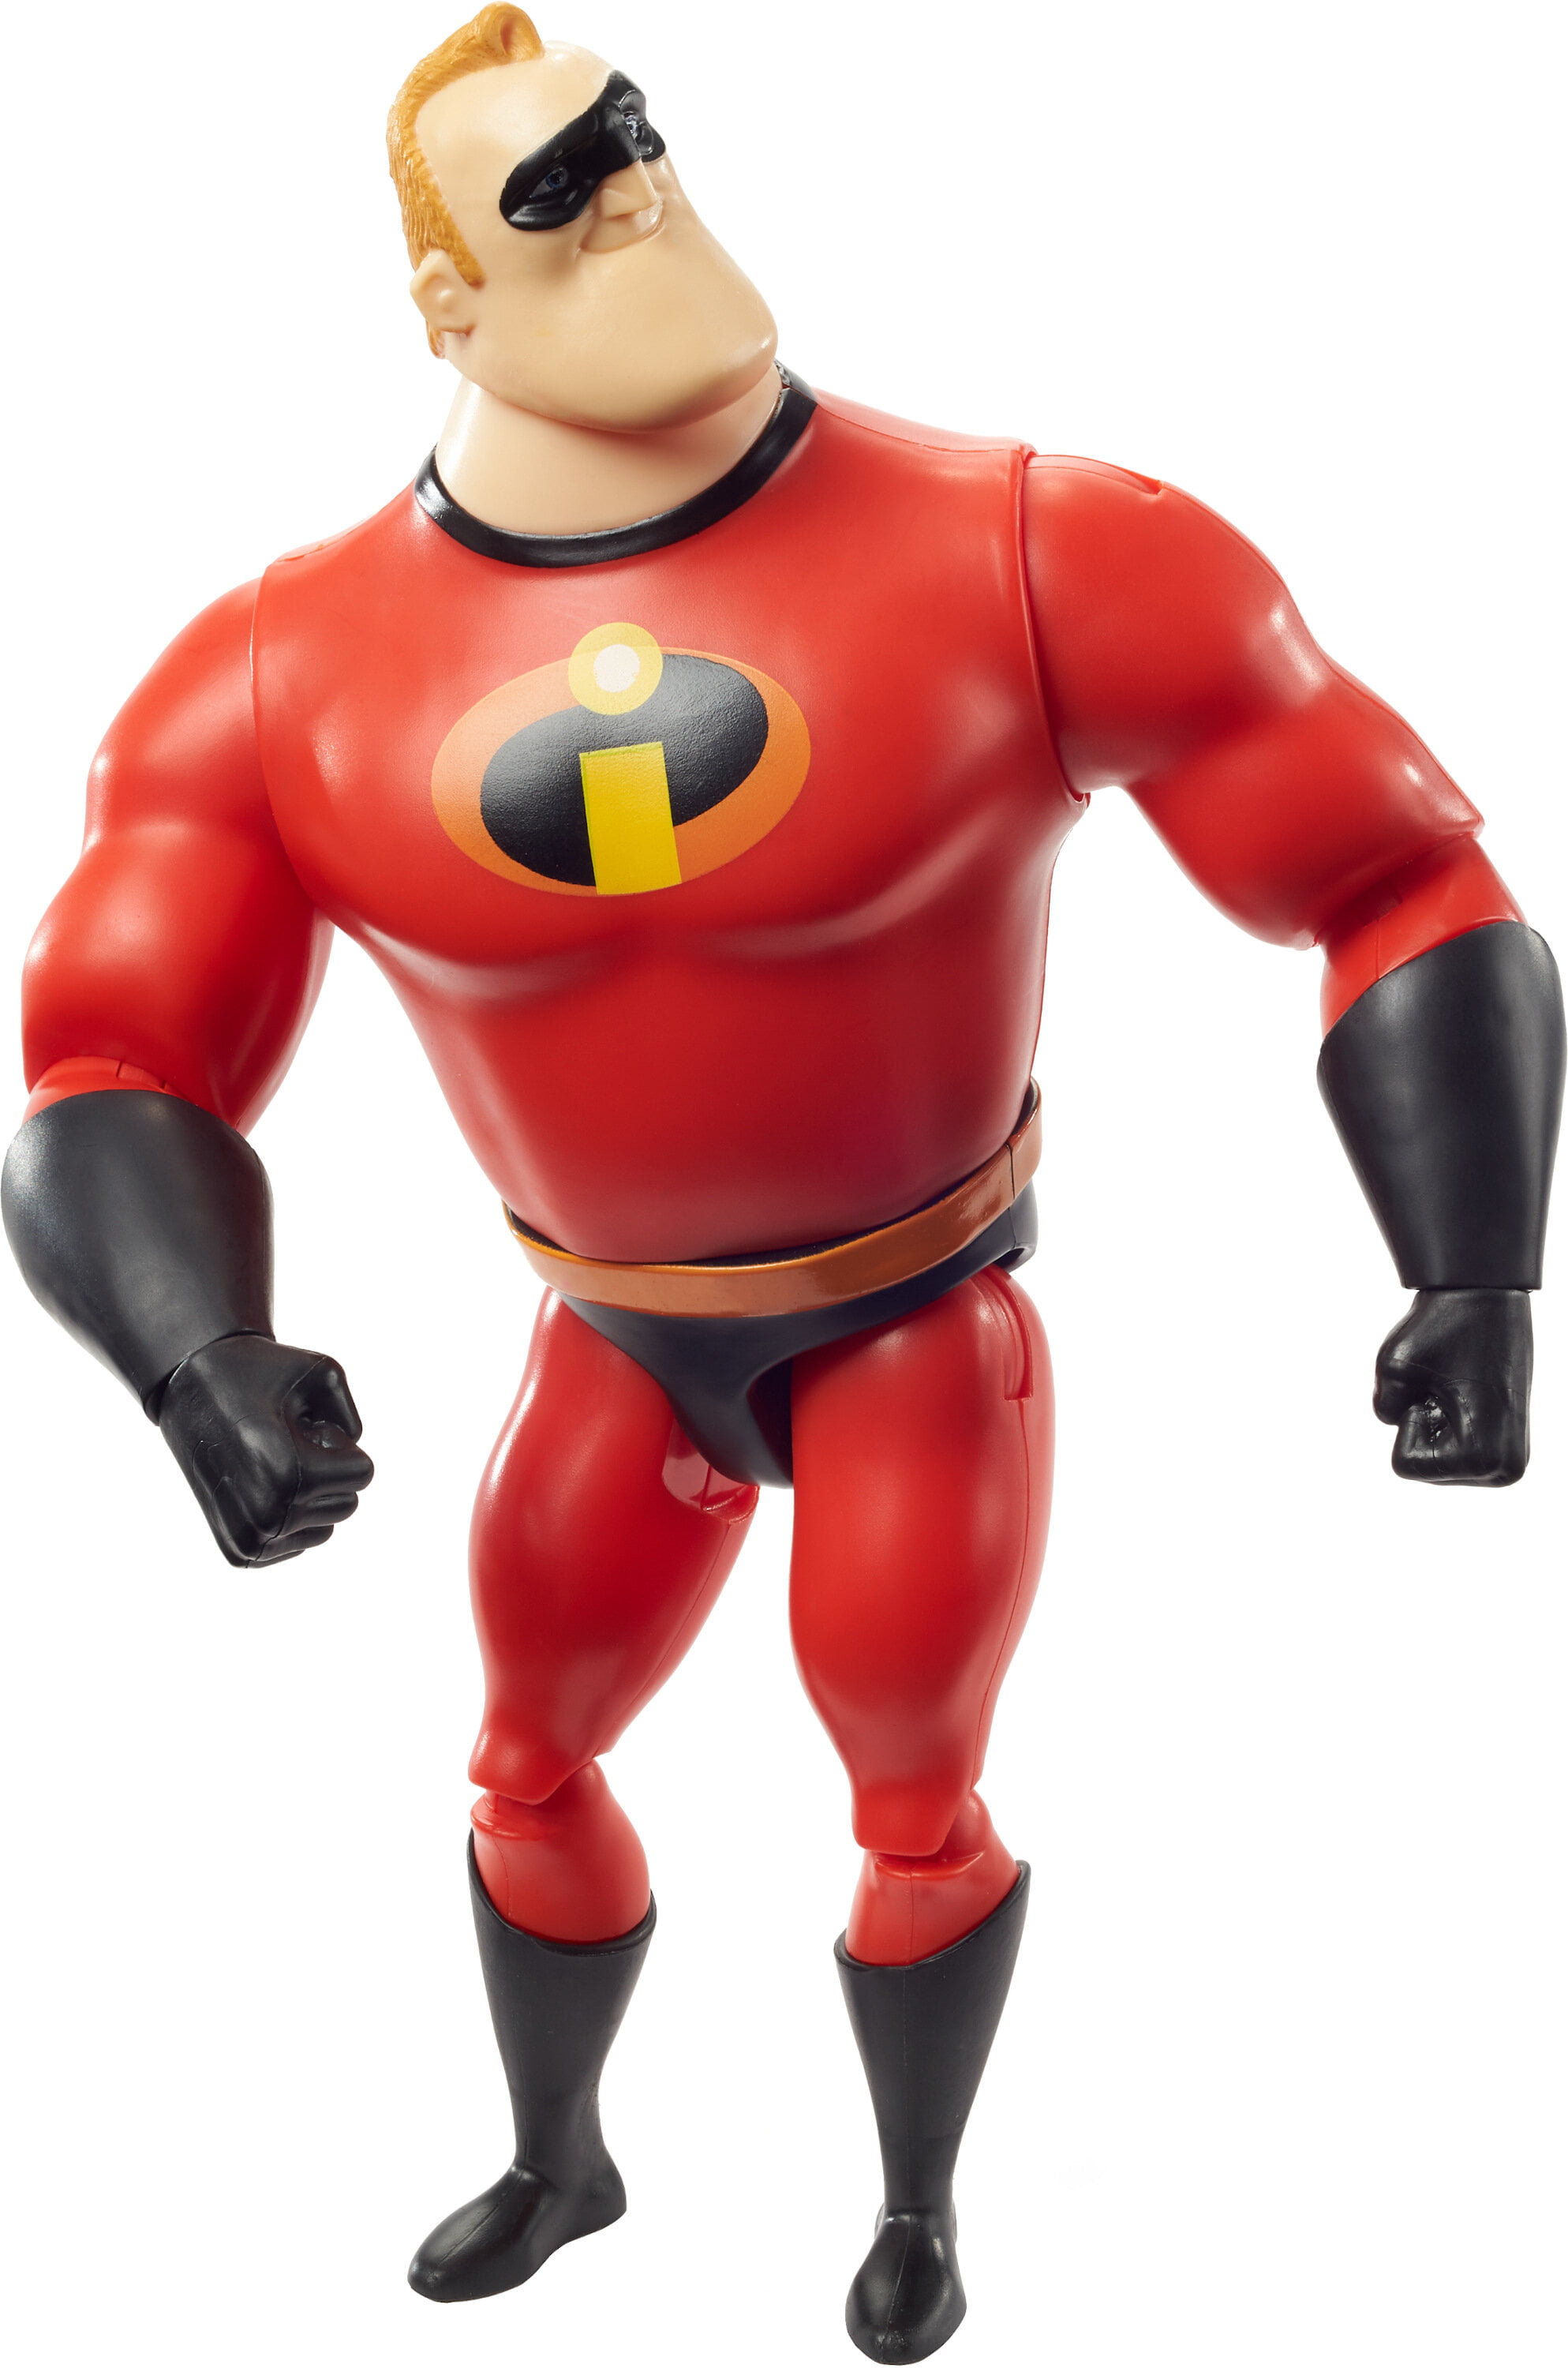 NEW OFFICIAL 10" THE INCREDIBLES MR INCREDIBLE SOFT PLUSH TOY 